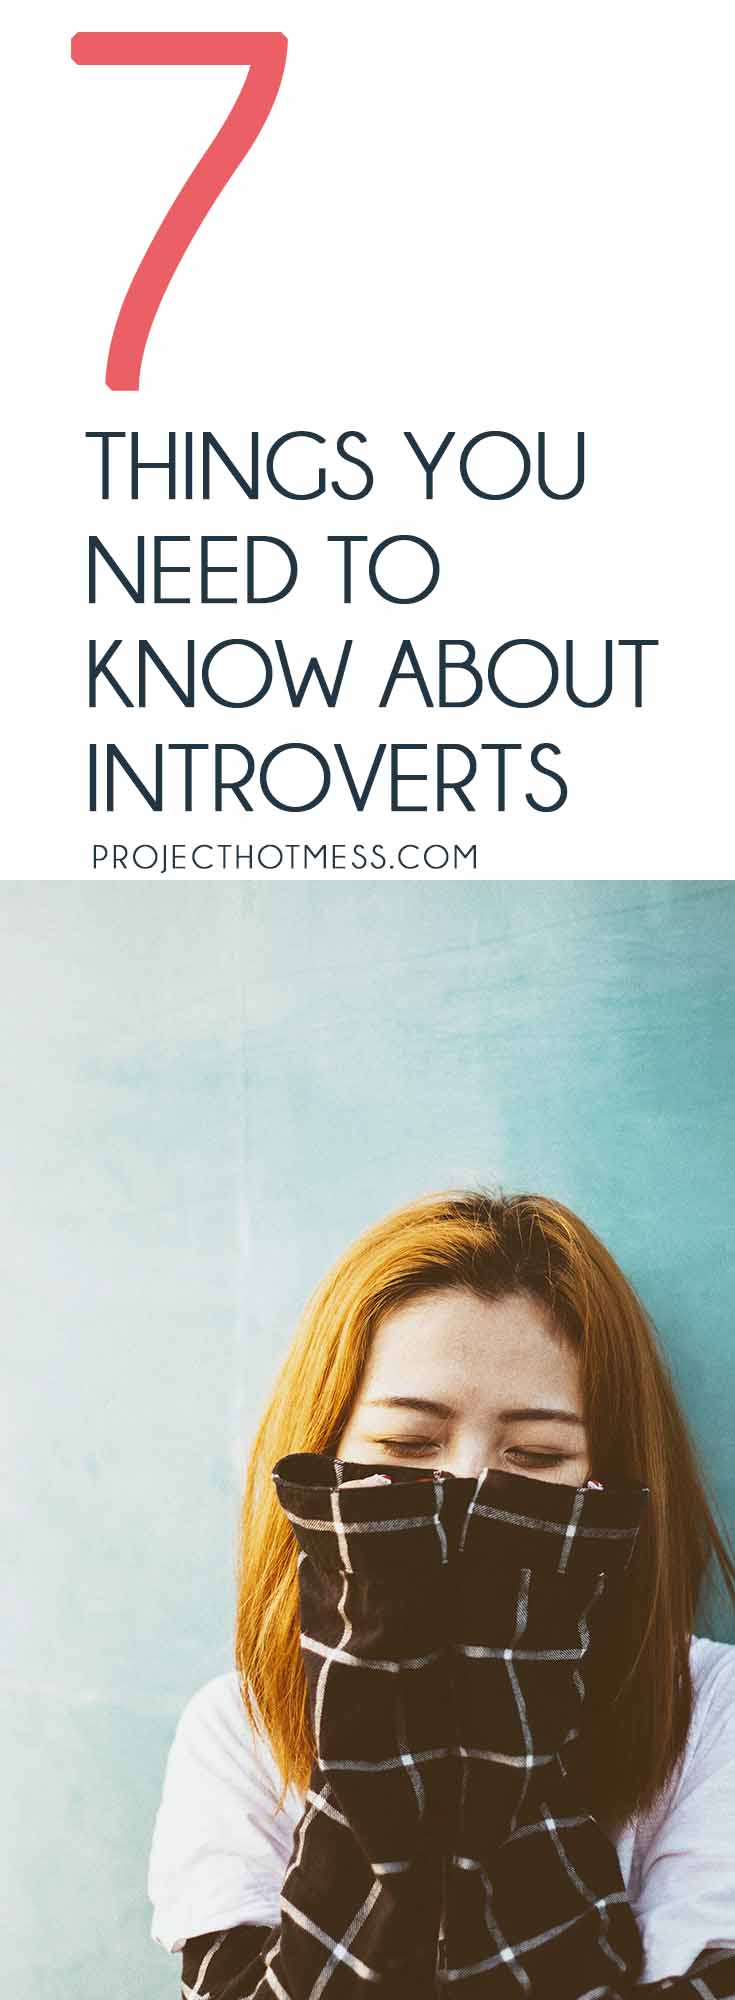 Introverts are often misunderstood, read as being shy or rude when this may not be the case at all. Here are 7 things you need to know about introverts.